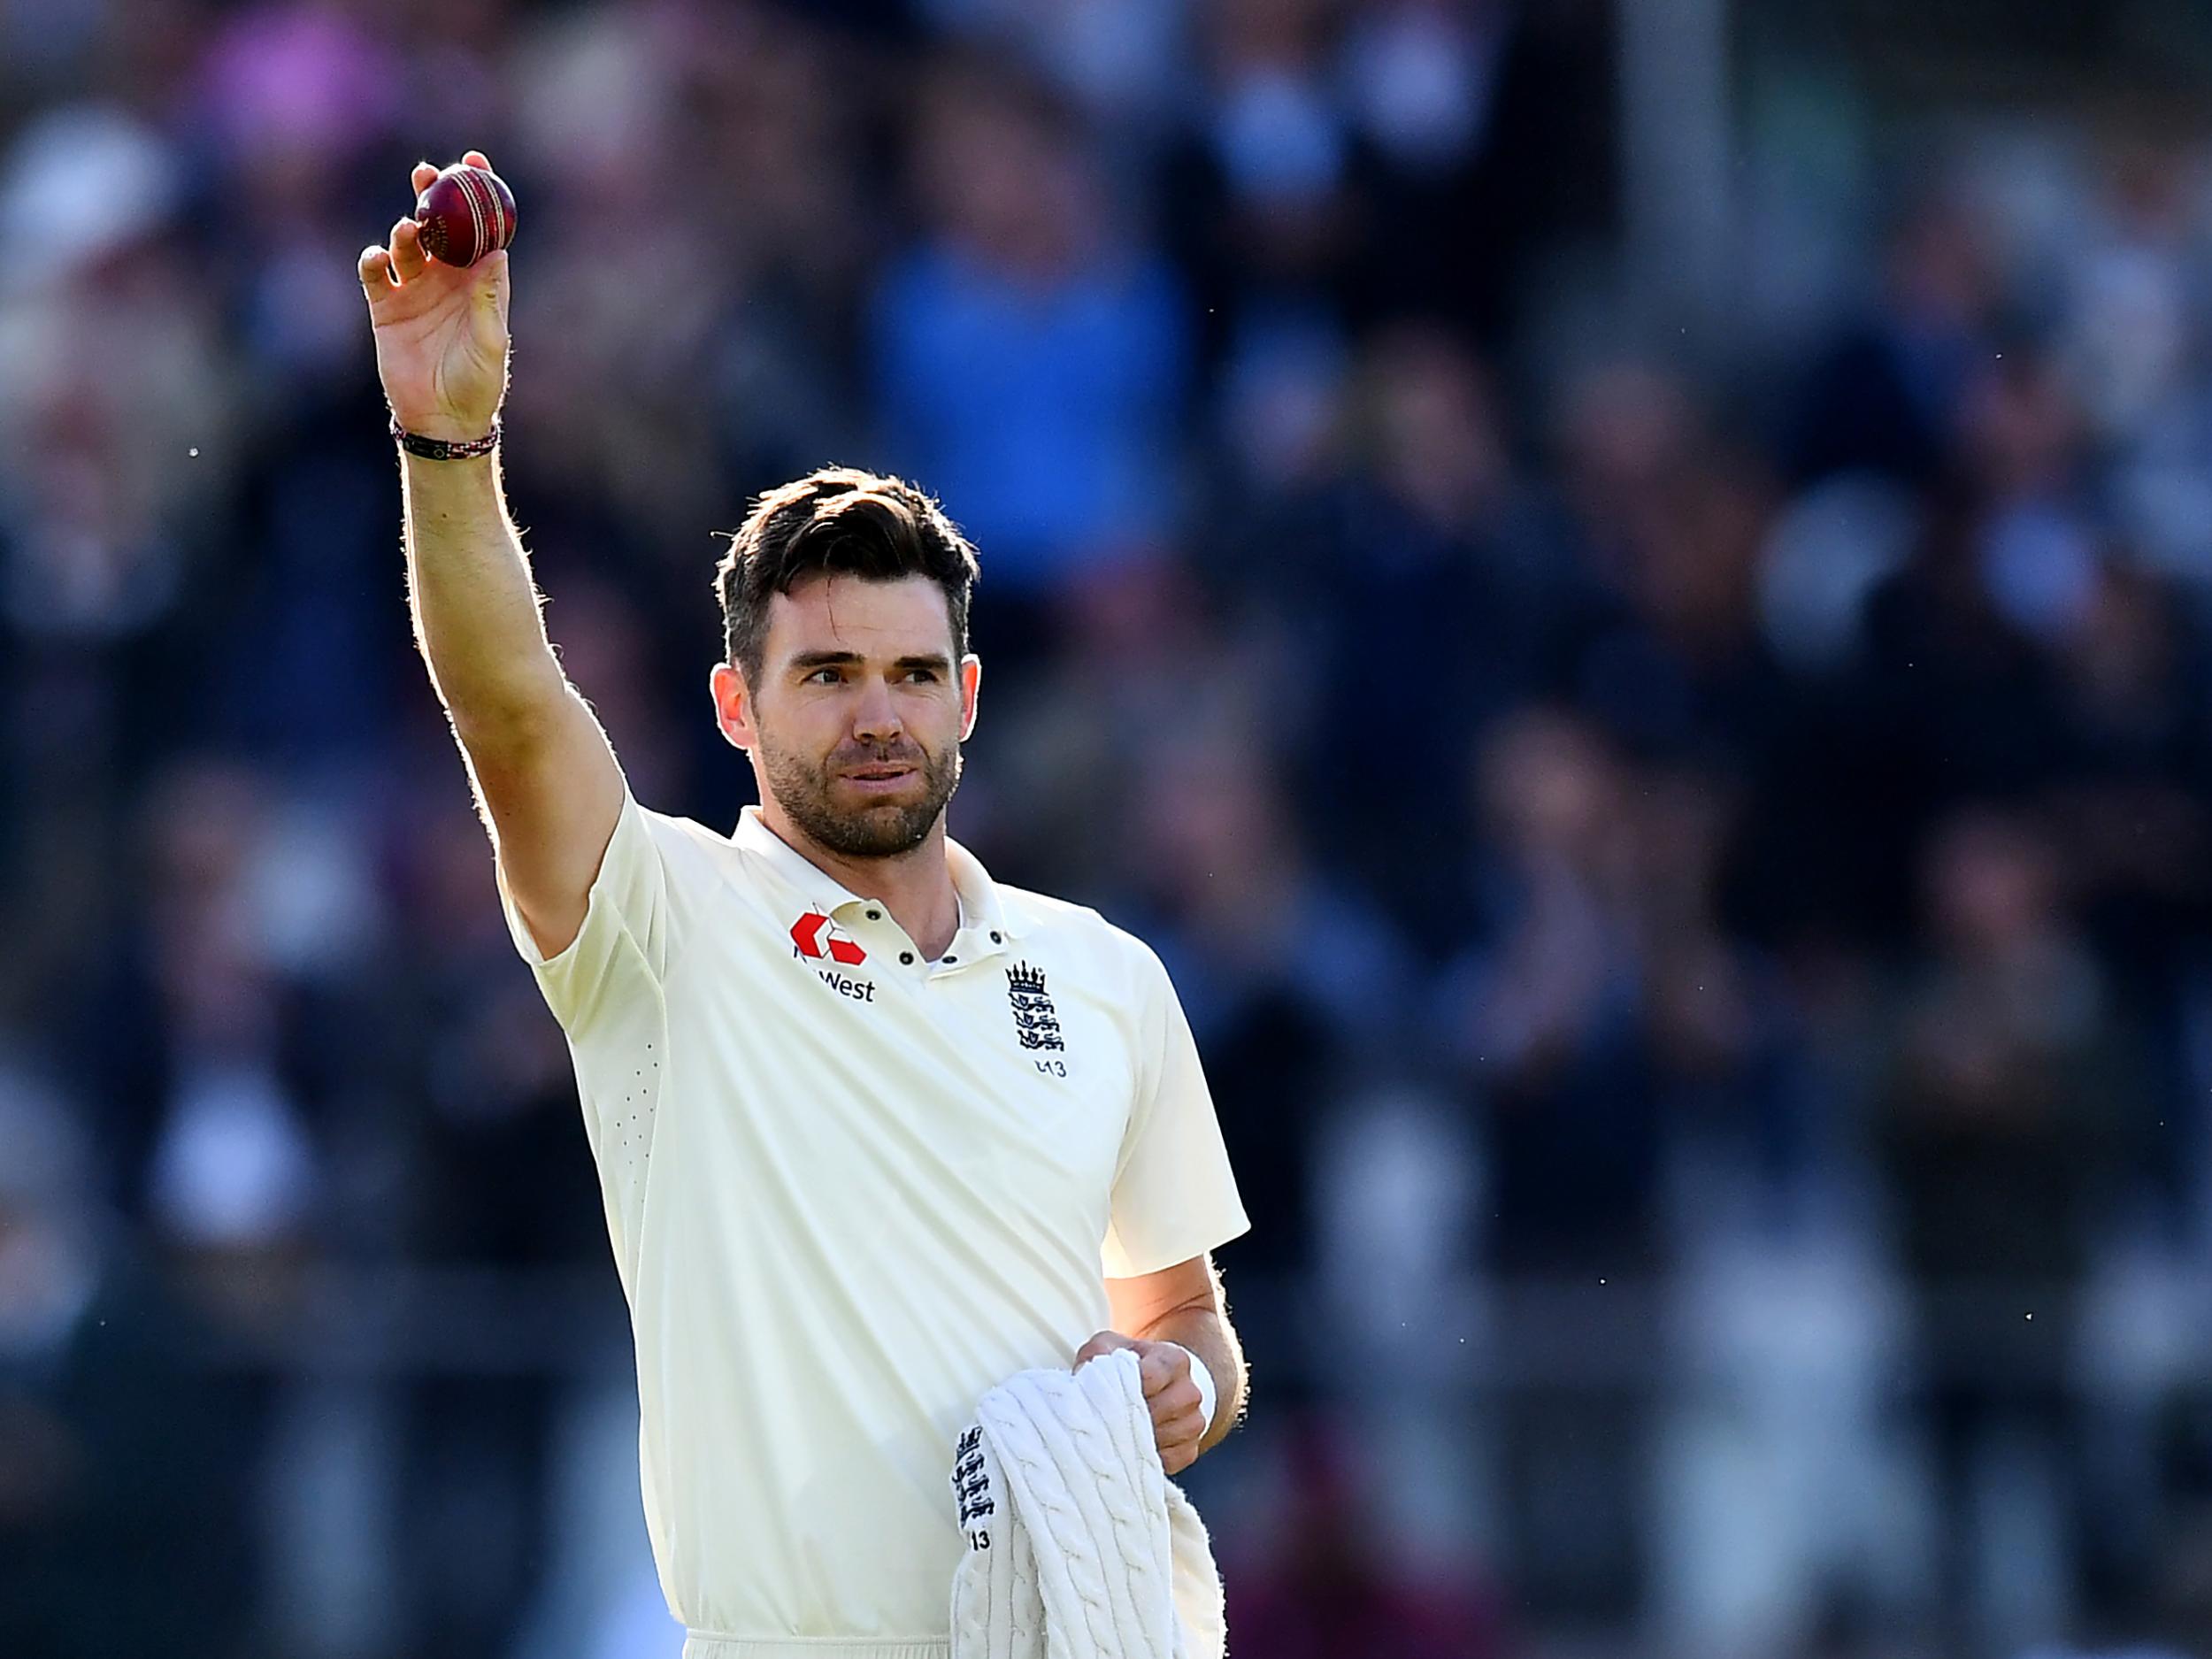 James Anderson claimed his 500th Test wicket with the scalp of Kraigg Brathwaite